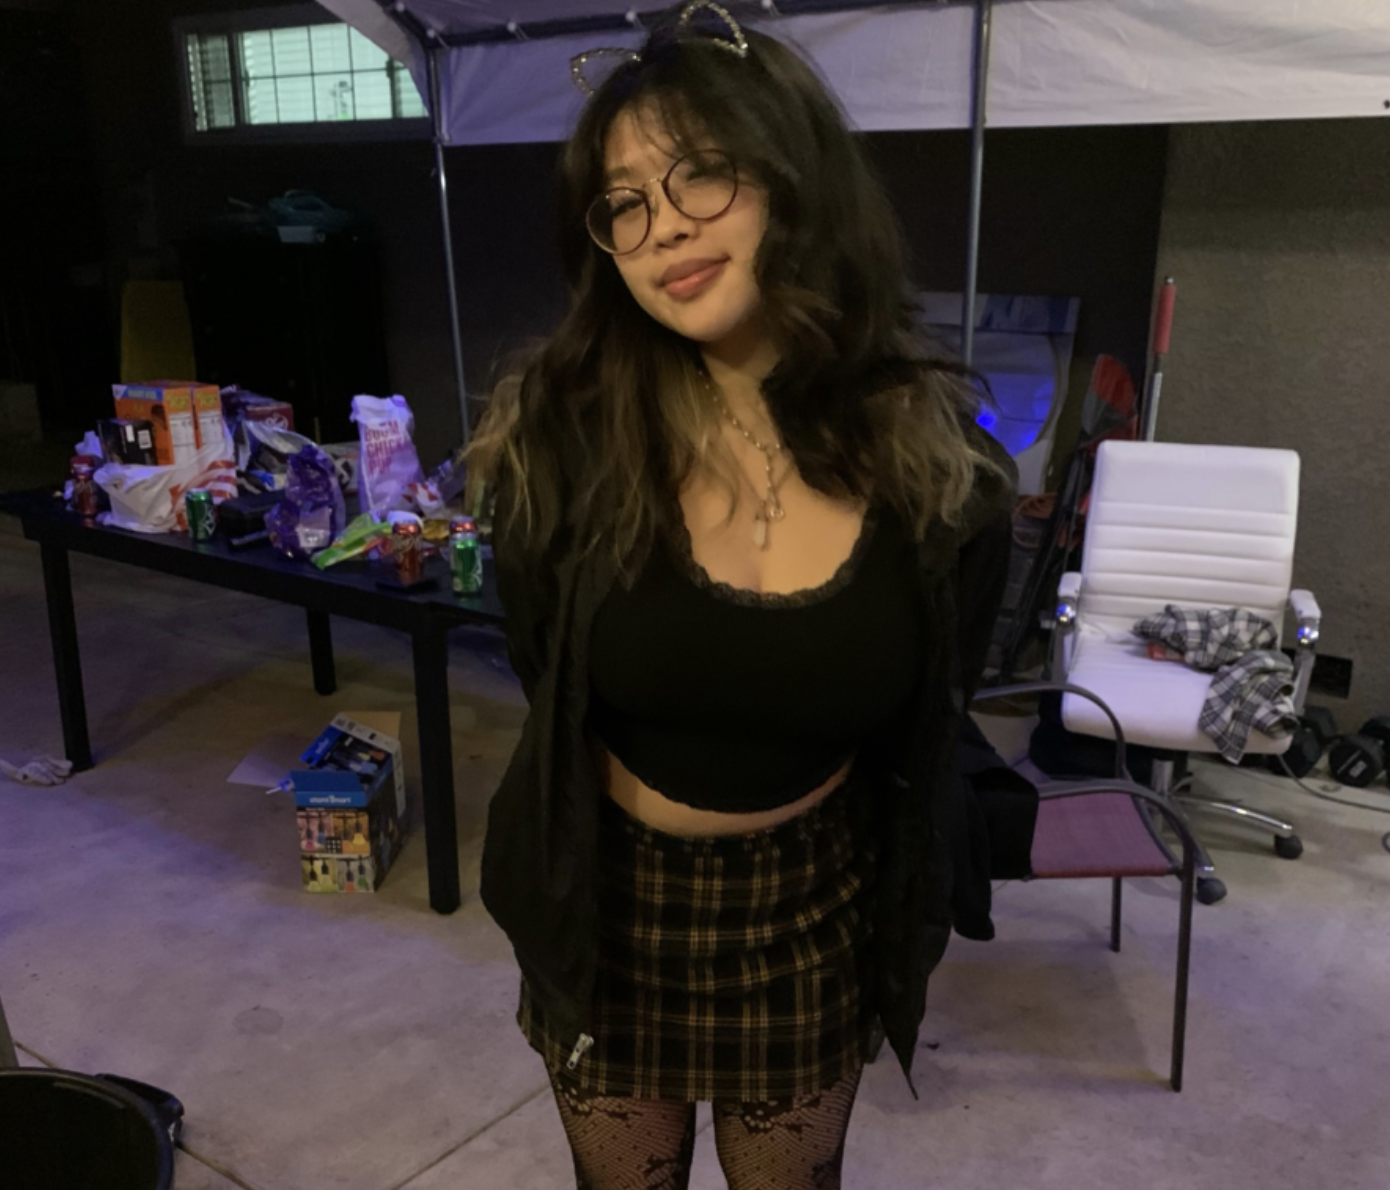 Senior Iris Shih wearing cat ears, a low-necked black crop top with a black jacket, a plaid skirt, and transparent leggings.